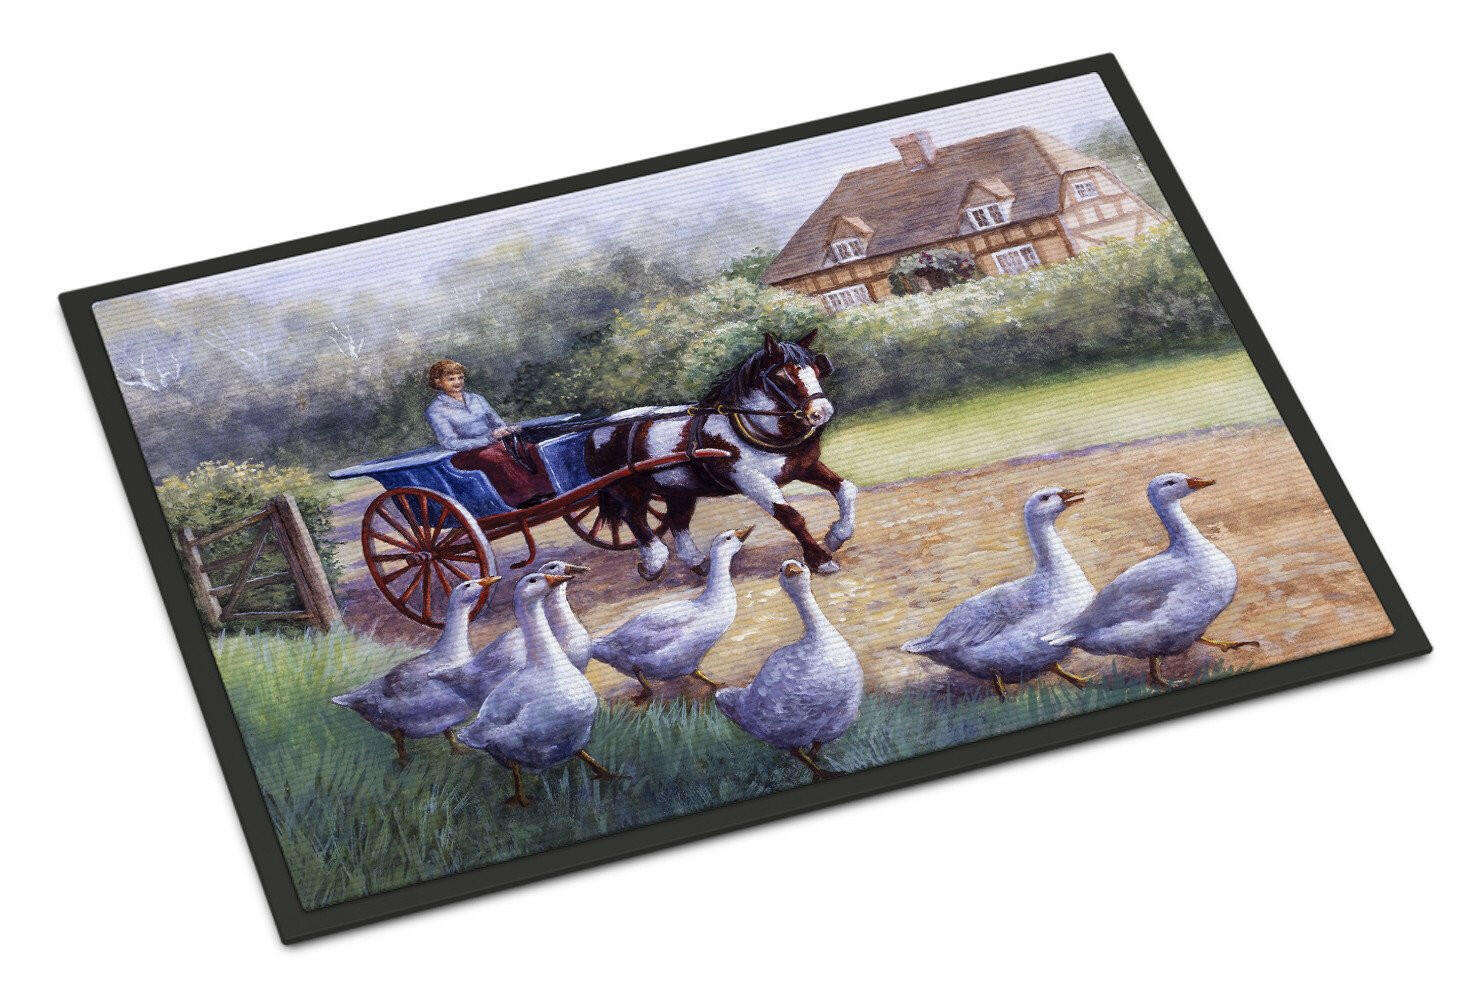 Geese Crossing before the Horse Indoor or Outdoor Mat 24x36 BDBA0351JMAT - the-store.com